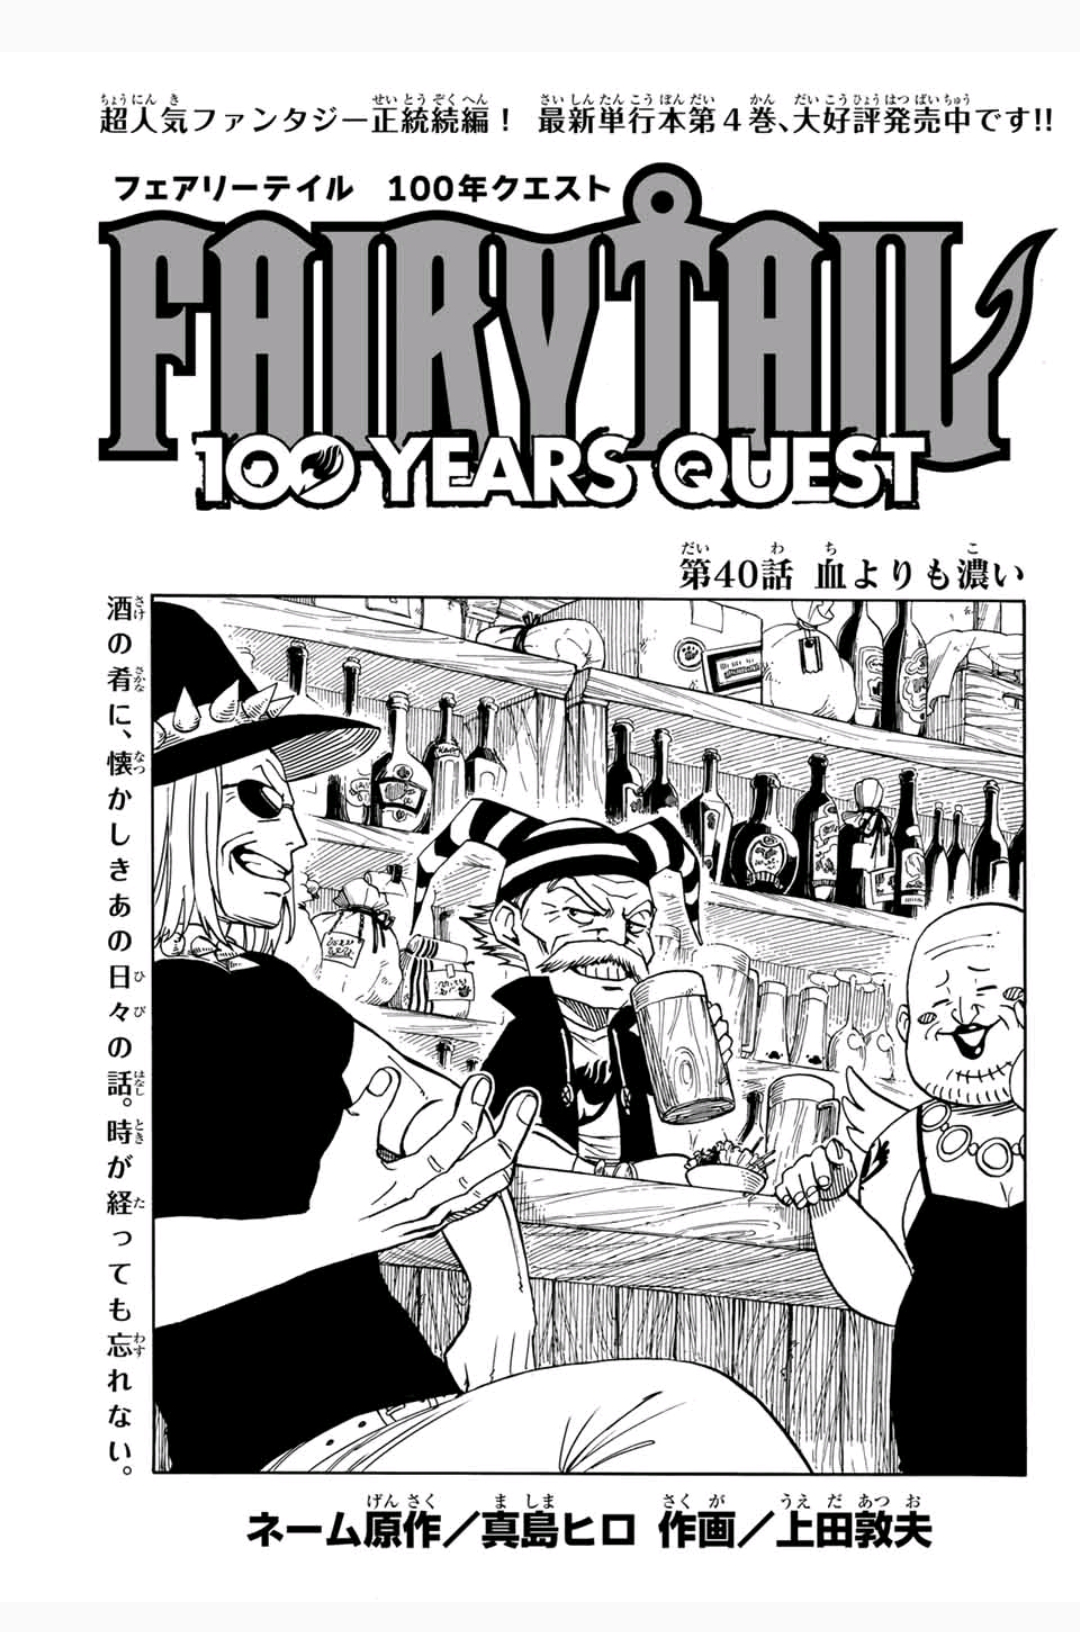 Fairy Tail 100 Years Quest Chapter 40 Fairy Tail Wiki Fandom